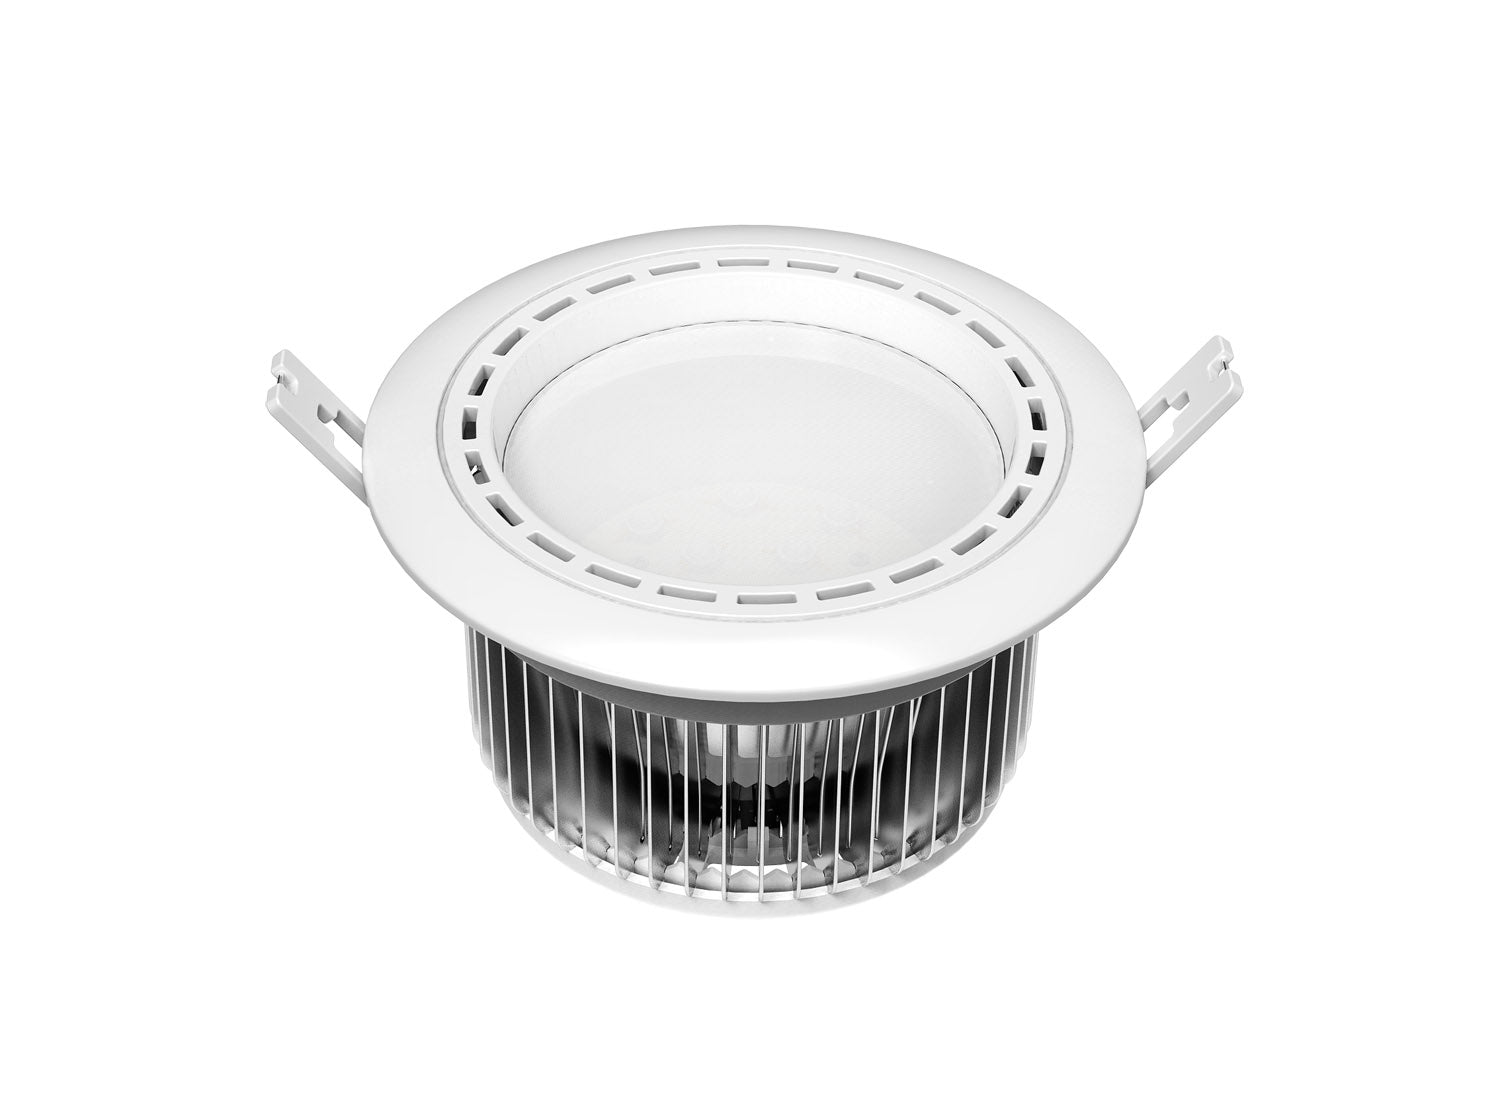 High Quality 6-8 inch  LED Downlight AC100-240V 24W/38W LED indoor Ceiling Down Light Recessed LED Spot Light For Living room